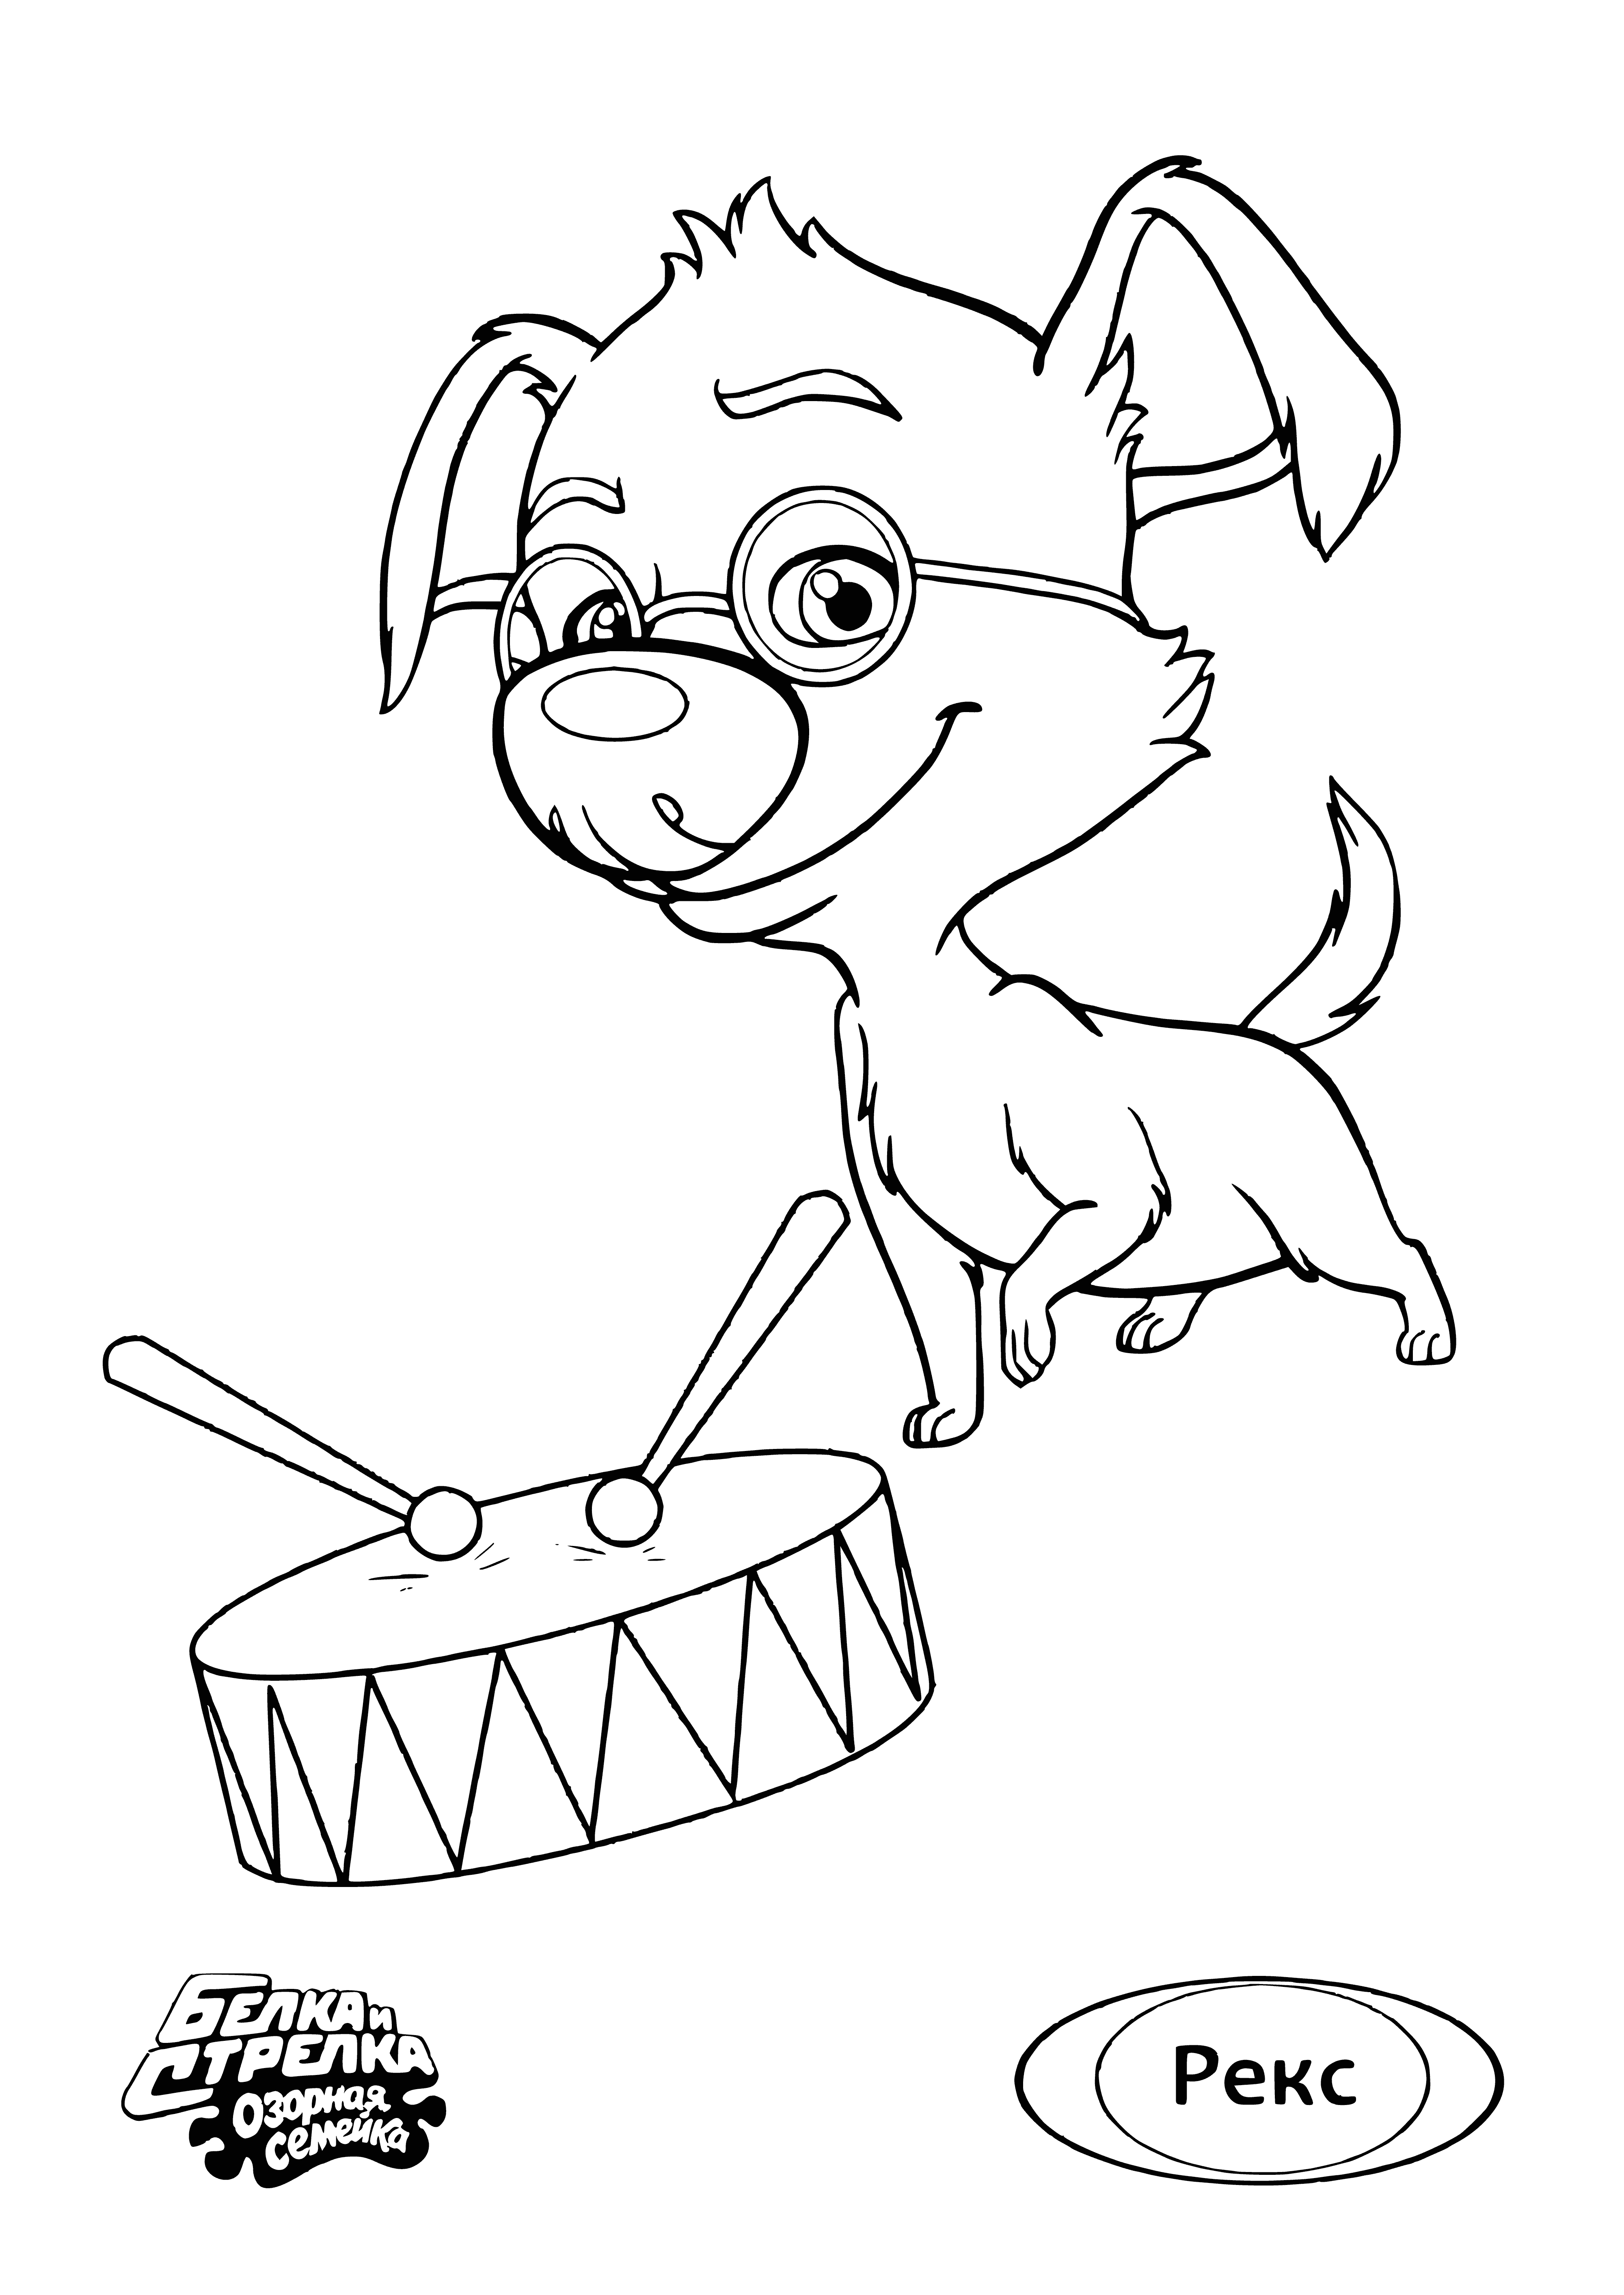 coloring page: 3 dogs in coloring page: one stands, 2 sit, all looking at camera. Middle is brown/white, others black/white, tongues out having fun.